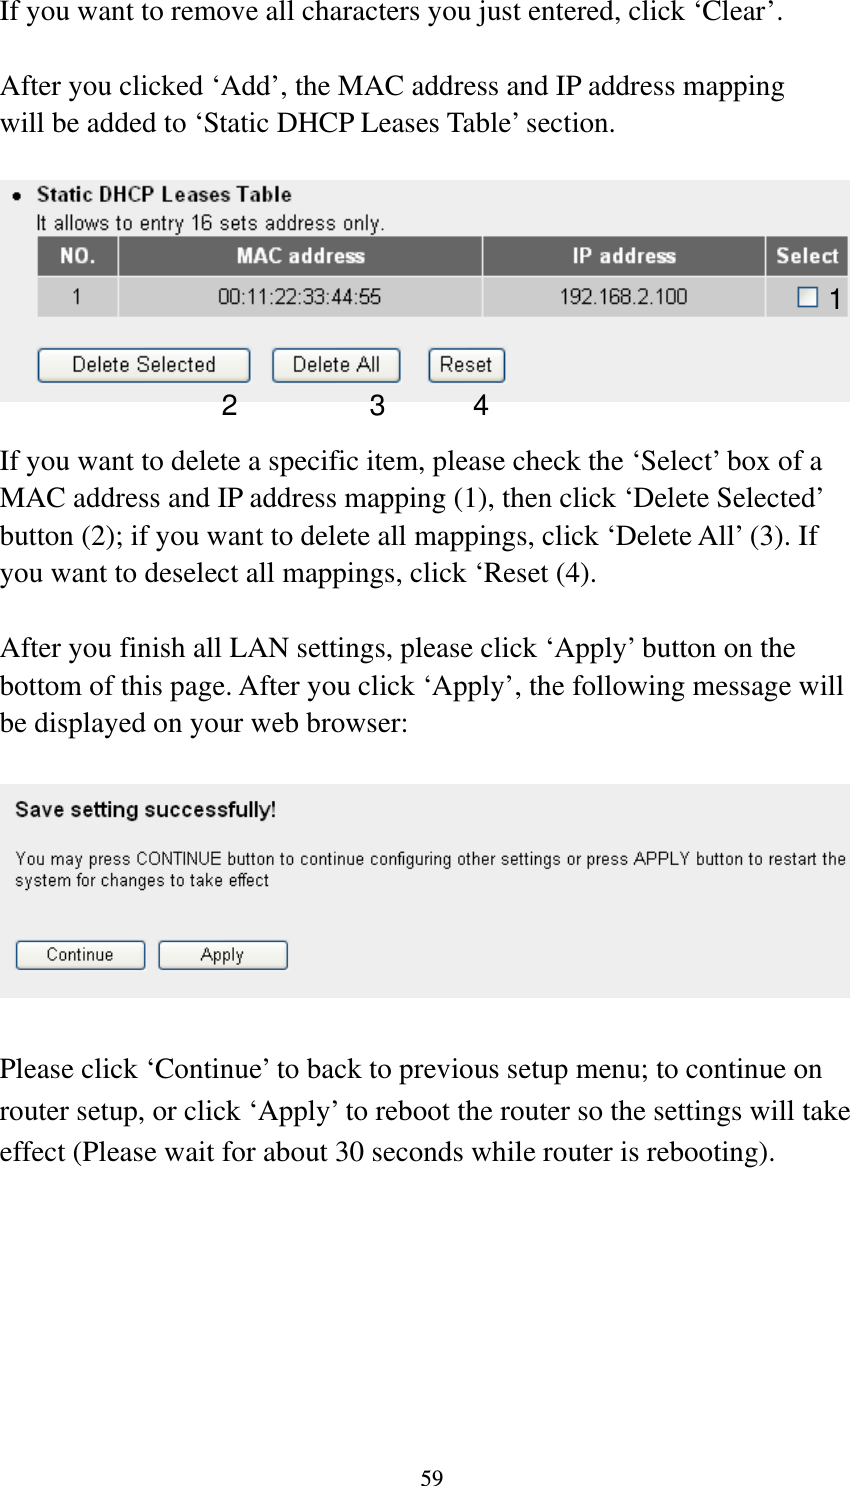 59 If you want to remove all characters you just entered, click ‘Clear’.  After you clicked ‘Add’, the MAC address and IP address mapping will be added to ‘Static DHCP Leases Table’ section.    If you want to delete a specific item, please check the ‘Select’ box of a MAC address and IP address mapping (1), then click ‘Delete Selected’ button (2); if you want to delete all mappings, click ‘Delete All’ (3). If you want to deselect all mappings, click ‘Reset (4).  After you finish all LAN settings, please click ‘Apply’ button on the bottom of this page. After you click ‘Apply’, the following message will be displayed on your web browser:    Please click ‘Continue’ to back to previous setup menu; to continue on router setup, or click ‘Apply’ to reboot the router so the settings will take effect (Please wait for about 30 seconds while router is rebooting). 1 2 3 4 